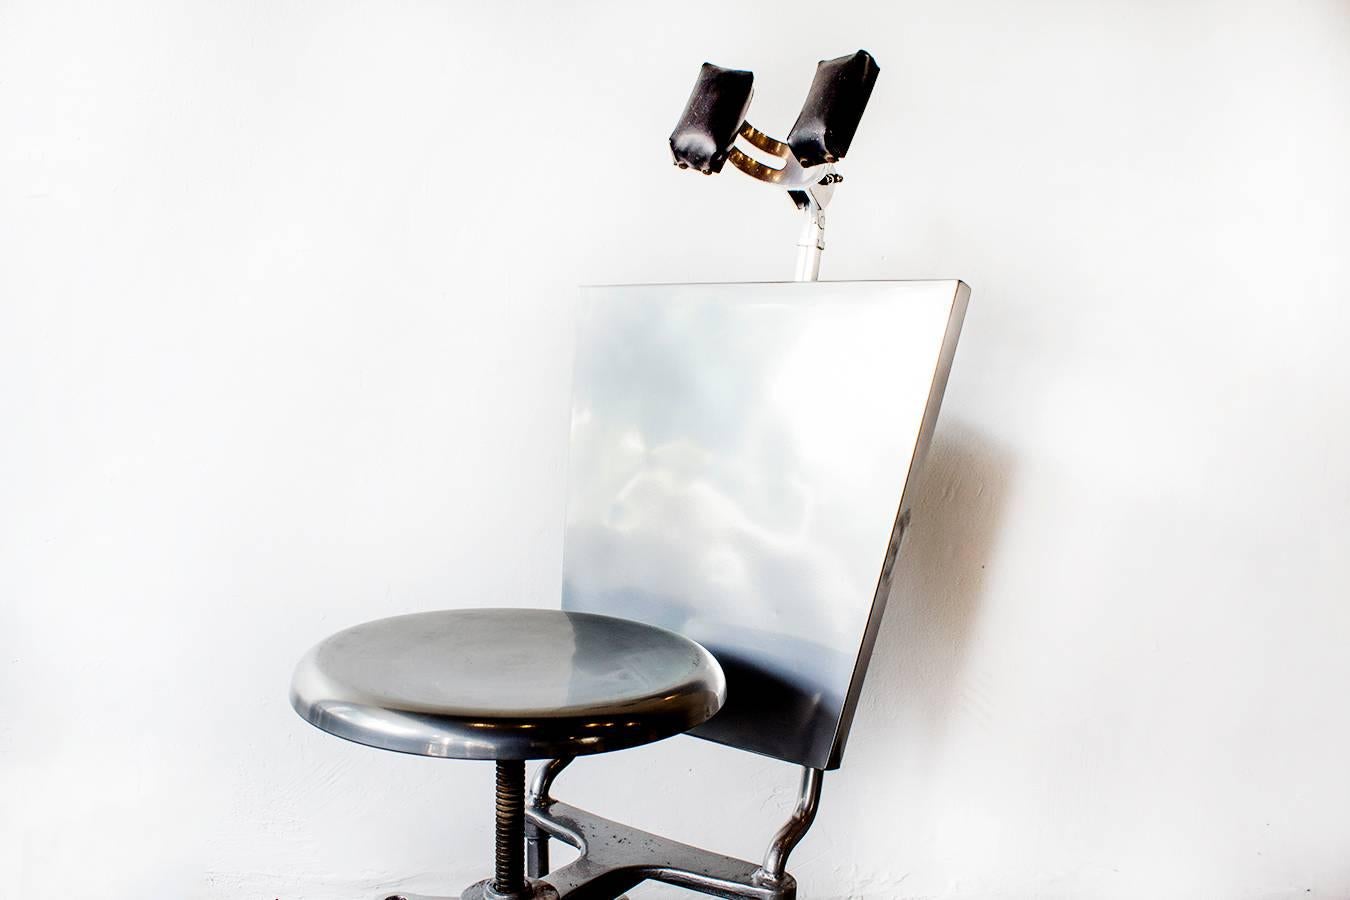 A most unusual industrial era medical exam chair, circa 1930. We refinished this streamlined steel piece in metallic silver with a newly reupholstered leather headrest. Features adjustable seat and headrest. In excellent refinished condition.